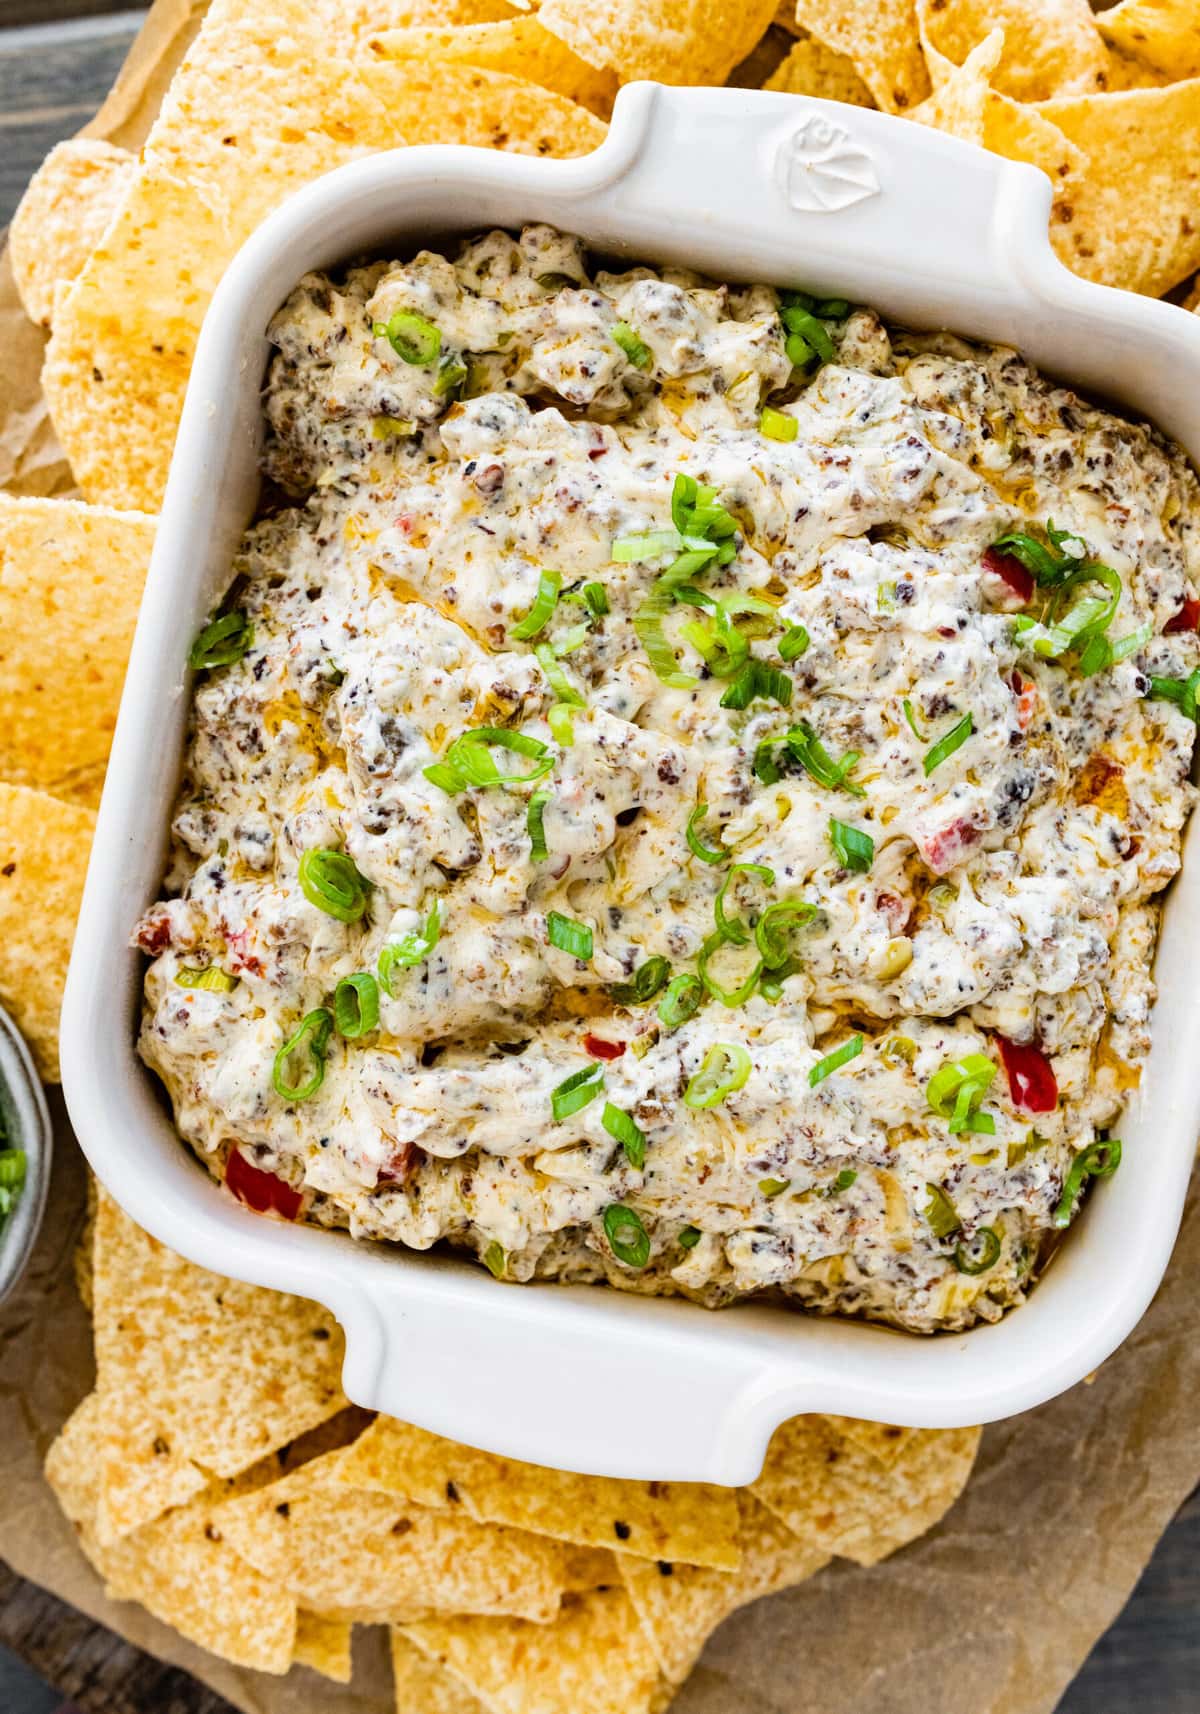 How to Make Best Jimmy Dean Sausage Dip Recipe with Cream Cheese- put in a serving dish and serve with chips.